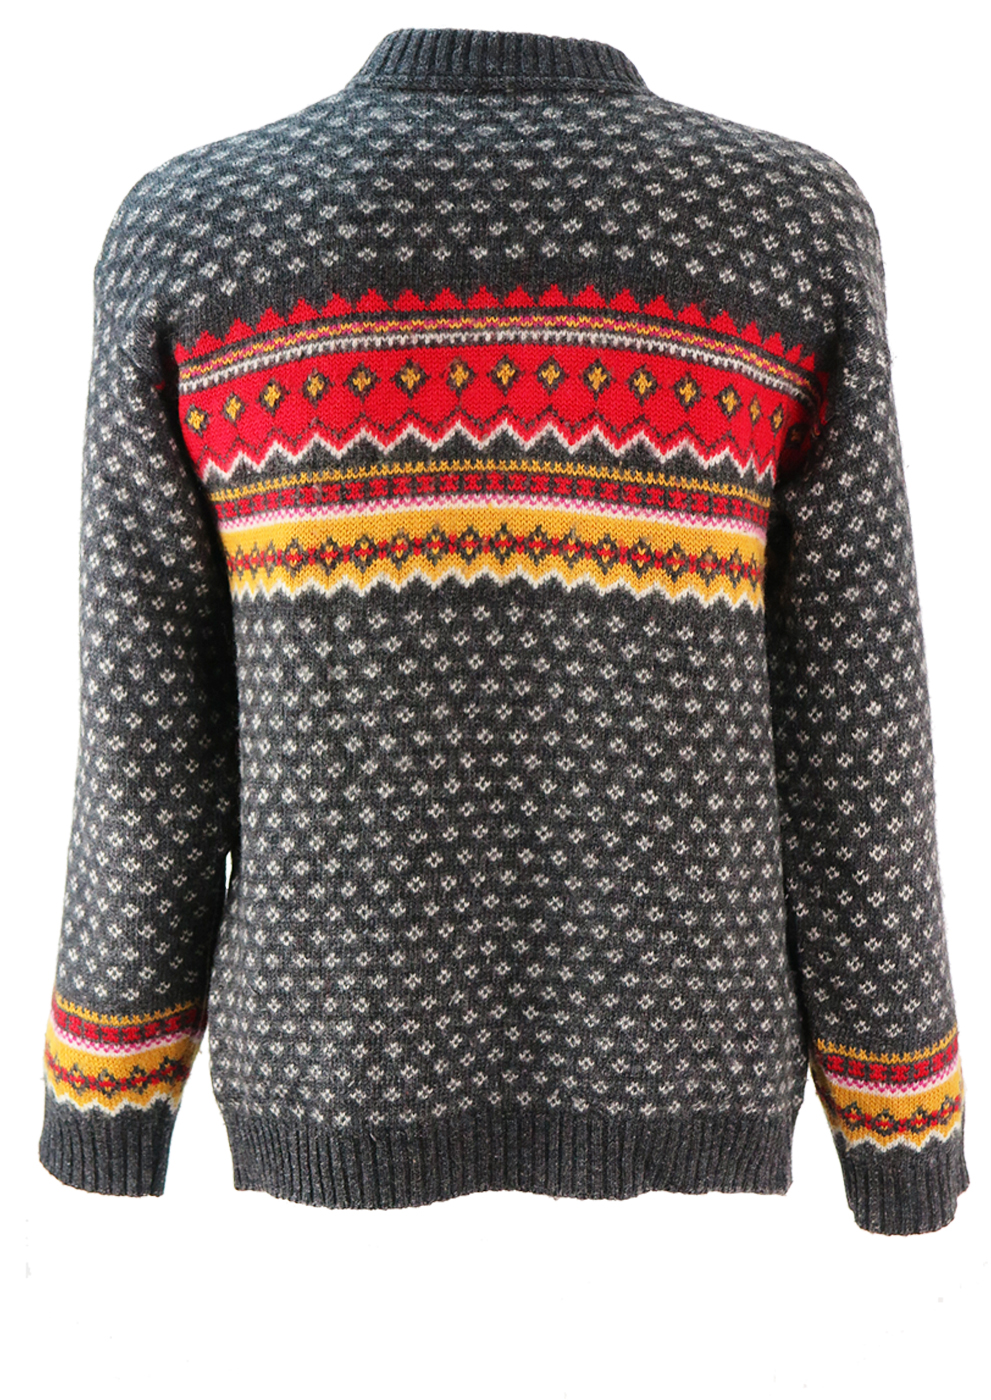 Grey Wool Jumper with Red, Yellow & White Fair Isle Pattern - M/L ...